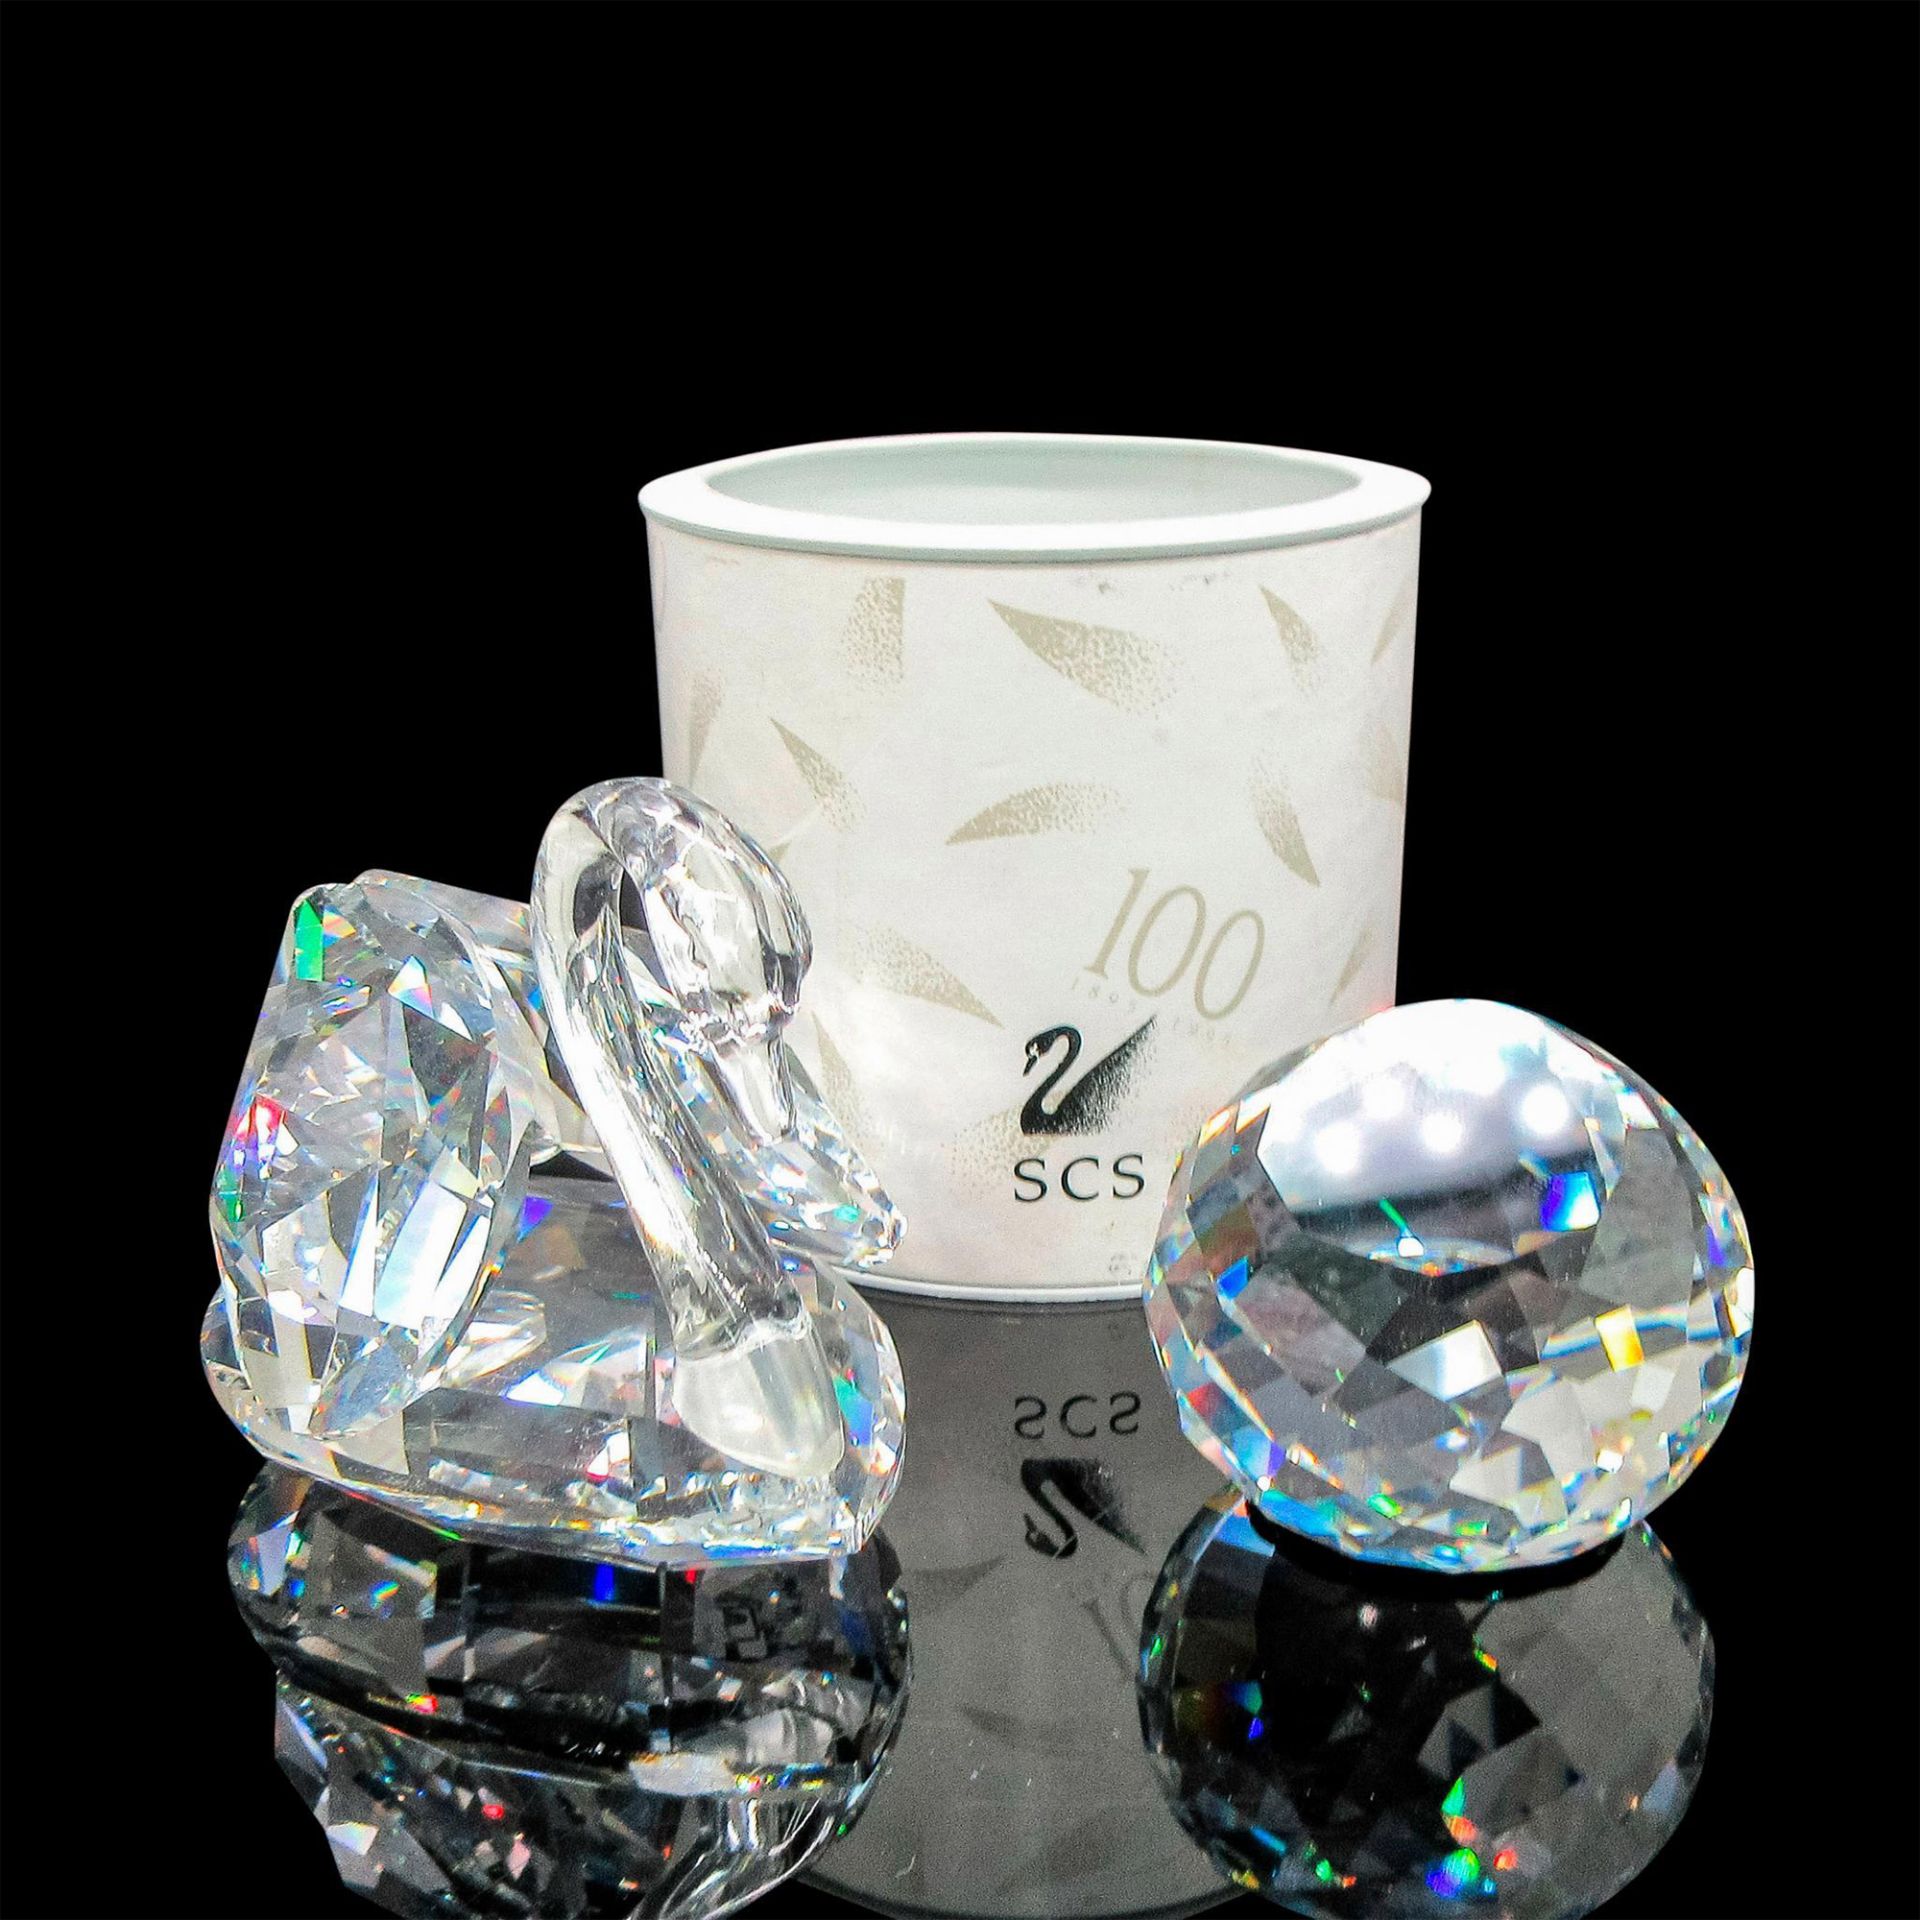 2pc Swarovski Crystal Large Swan Figurine and Paperweight - Image 4 of 4